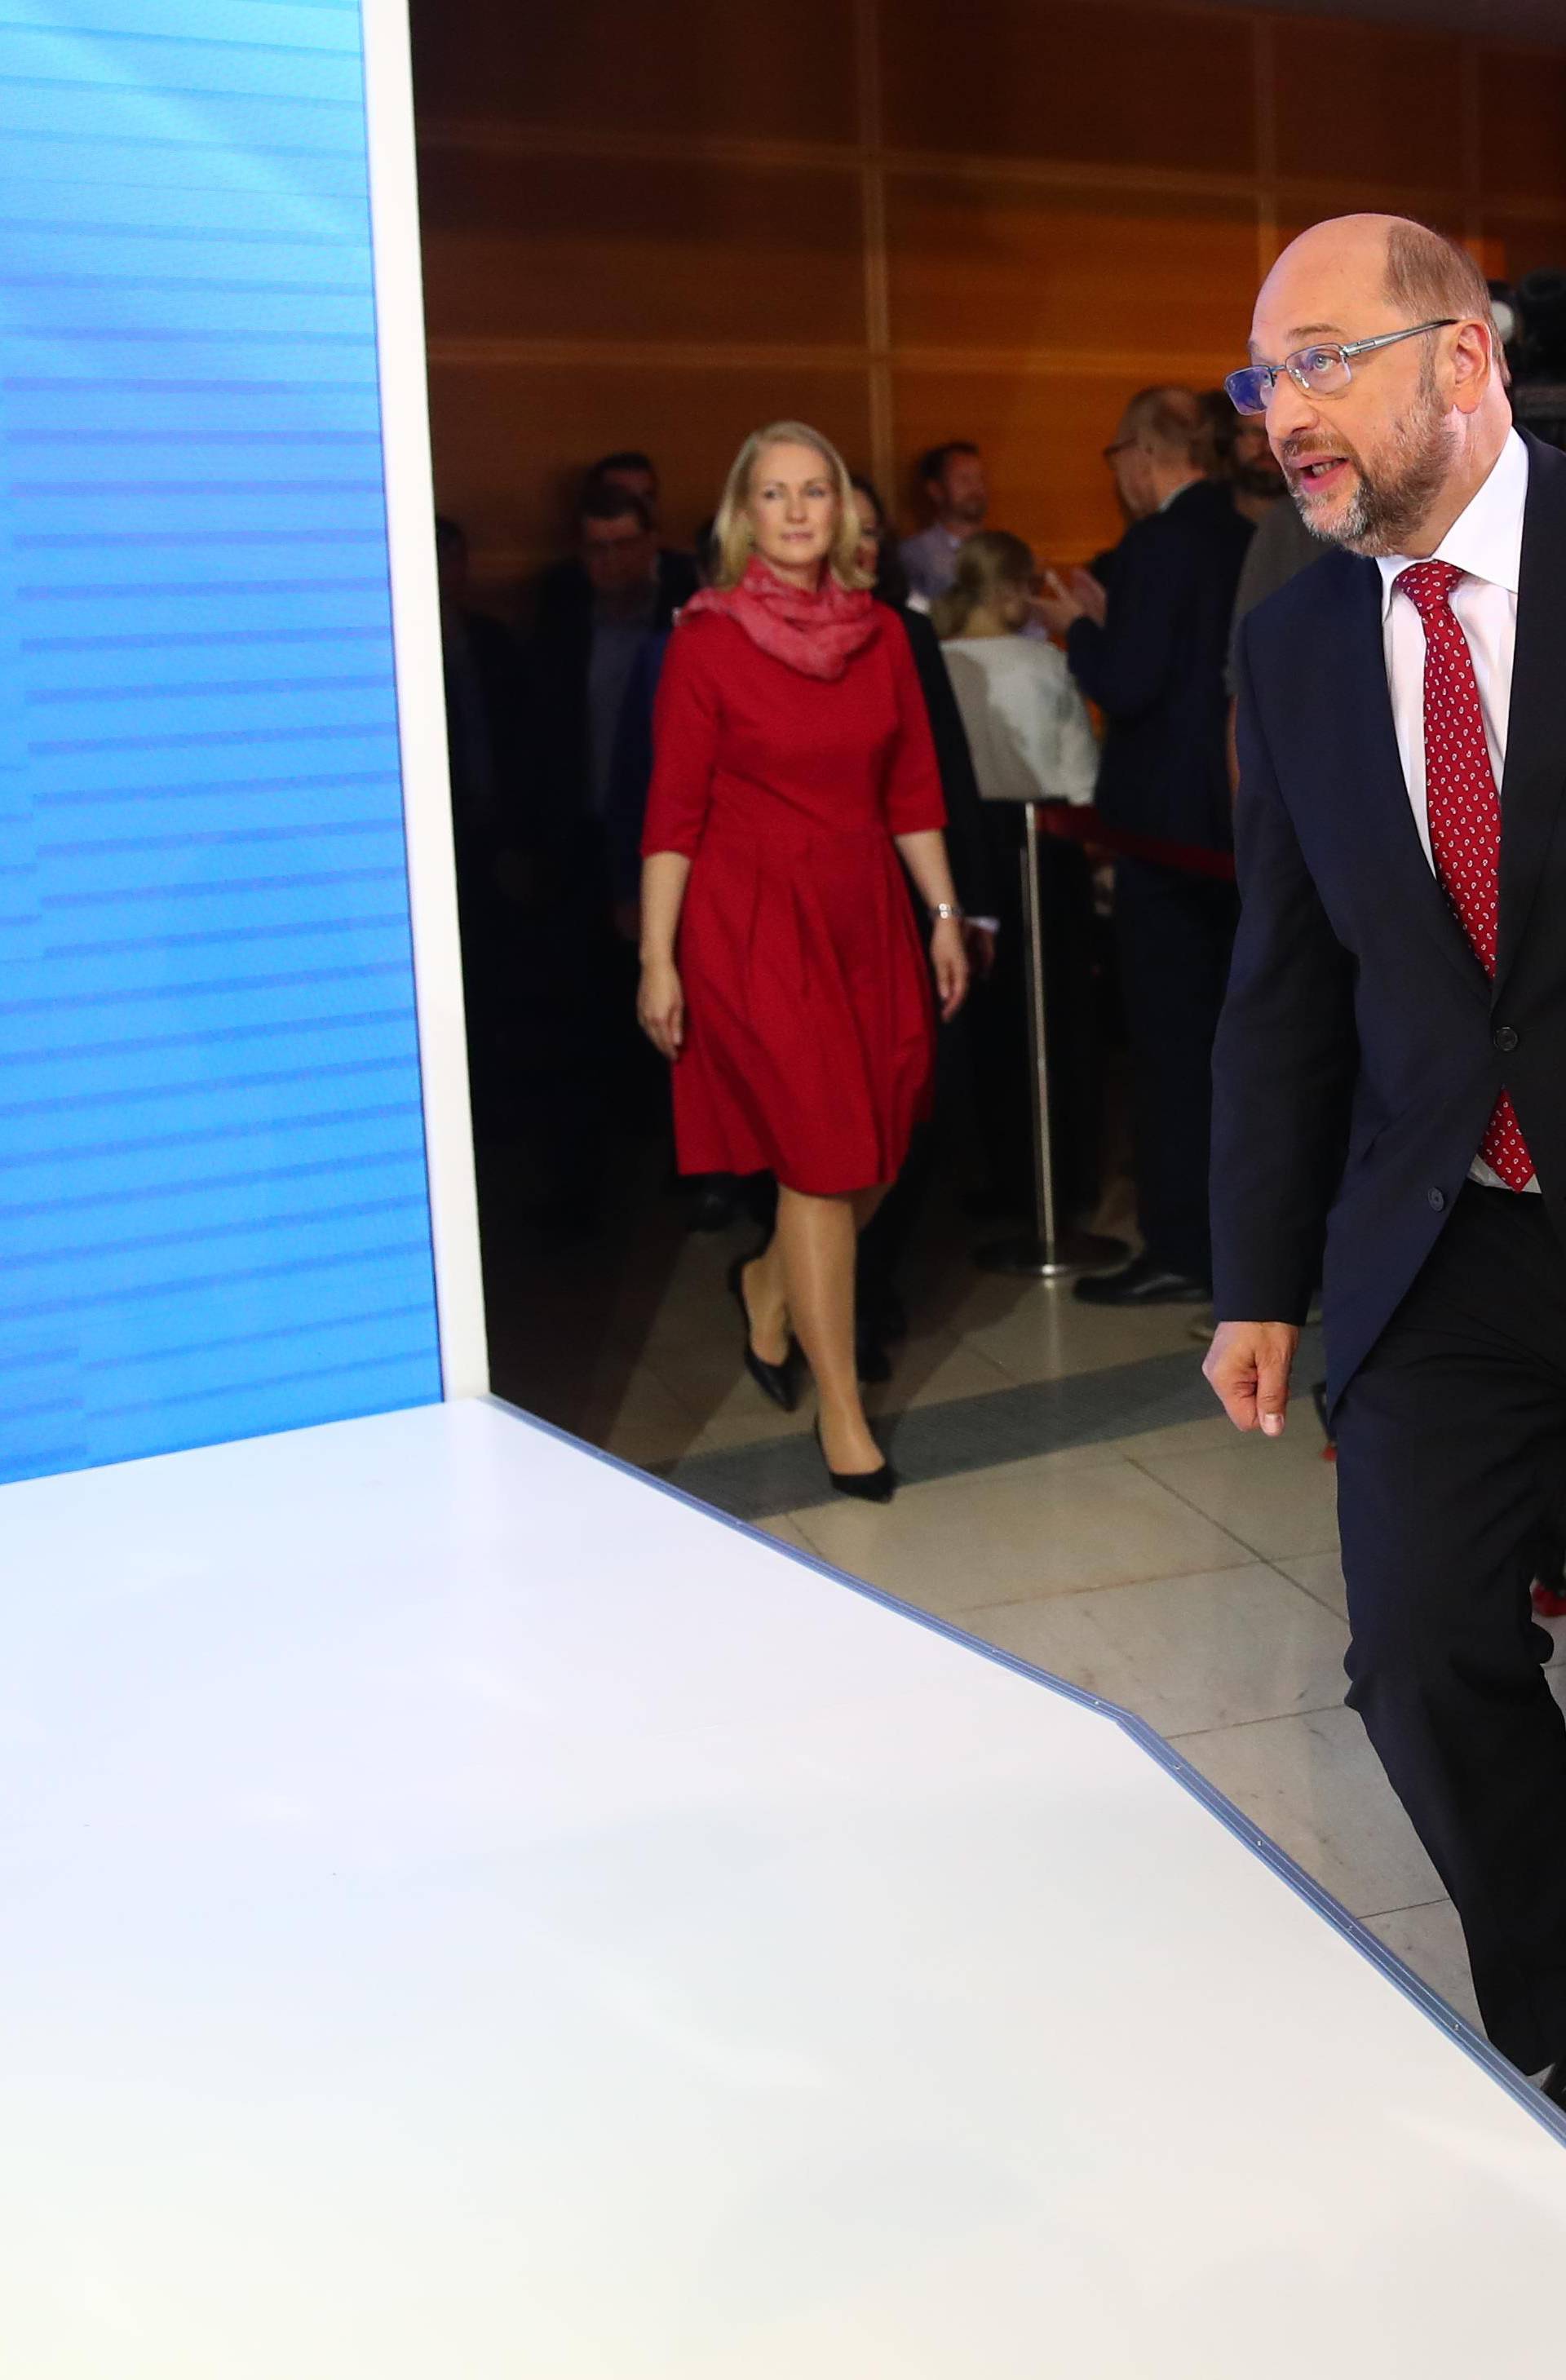 Social Democratic Party leader and top candidate Schulz reacts after first exit polls of the general election